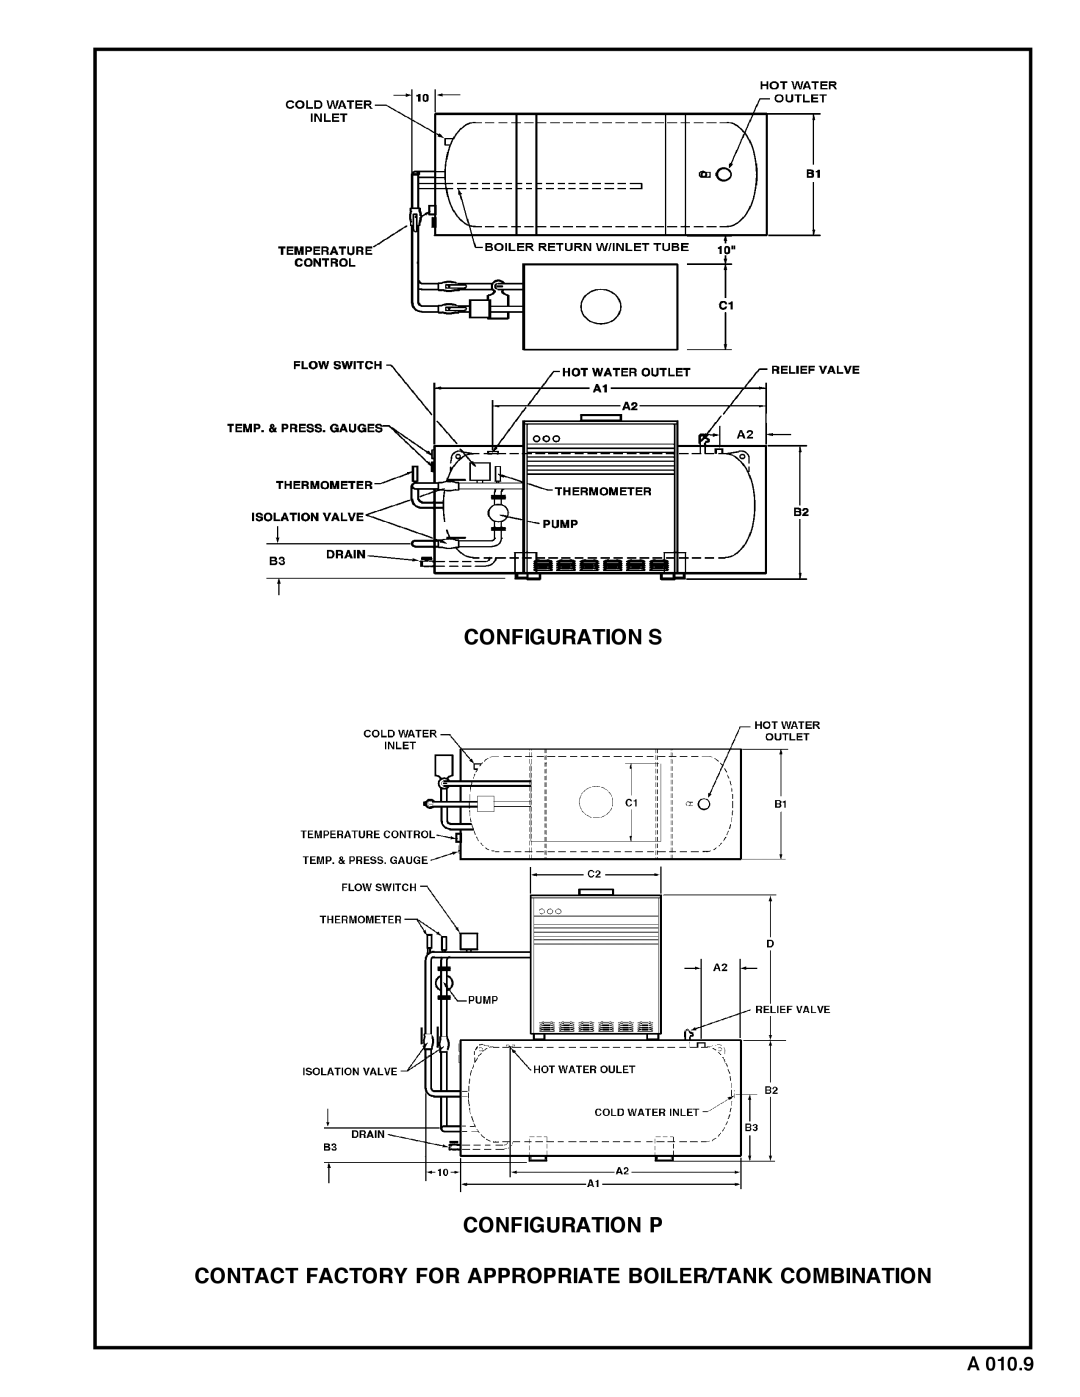 A.O. Smith DWT - 1210 warranty Configuration S Configuration P, Contact Factory For Appropriate Boiler/Tank Combination 